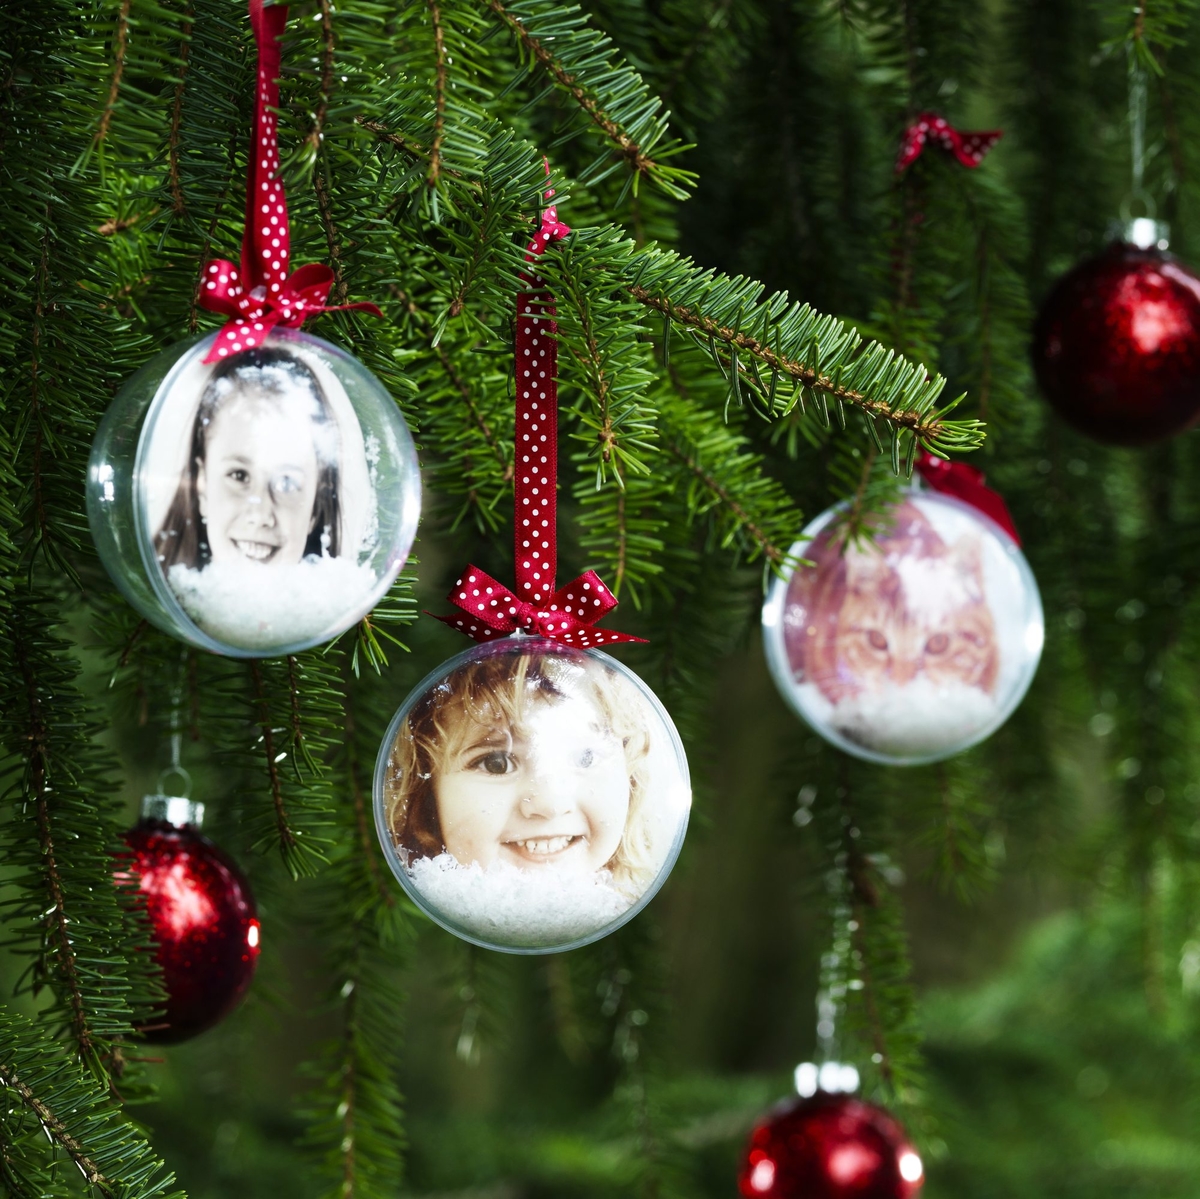 The most beautiful baubles!